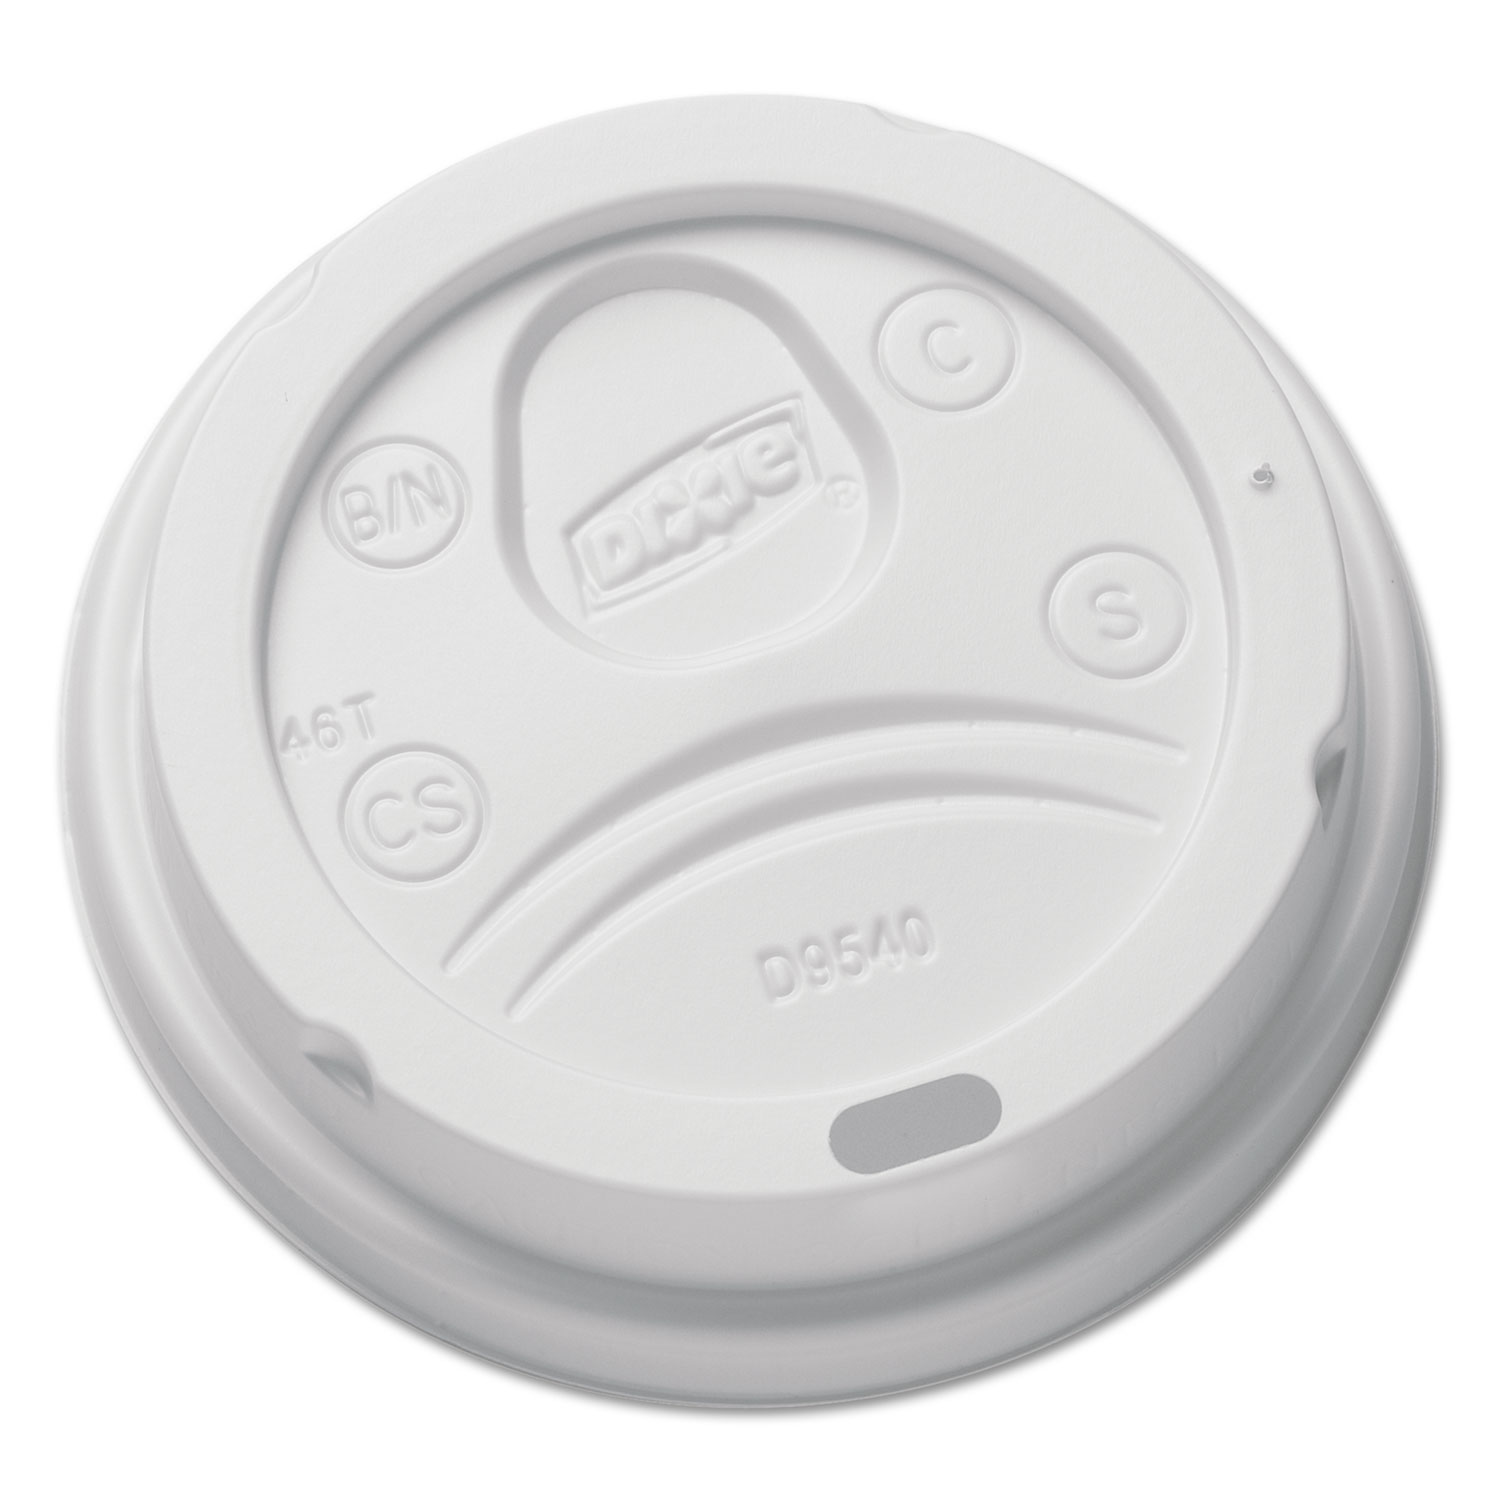  Dixie DL9540 Sip-Through Dome Hot Drink Lids for 10 oz Cups, White, 100/Pack (DXEDL9540) 